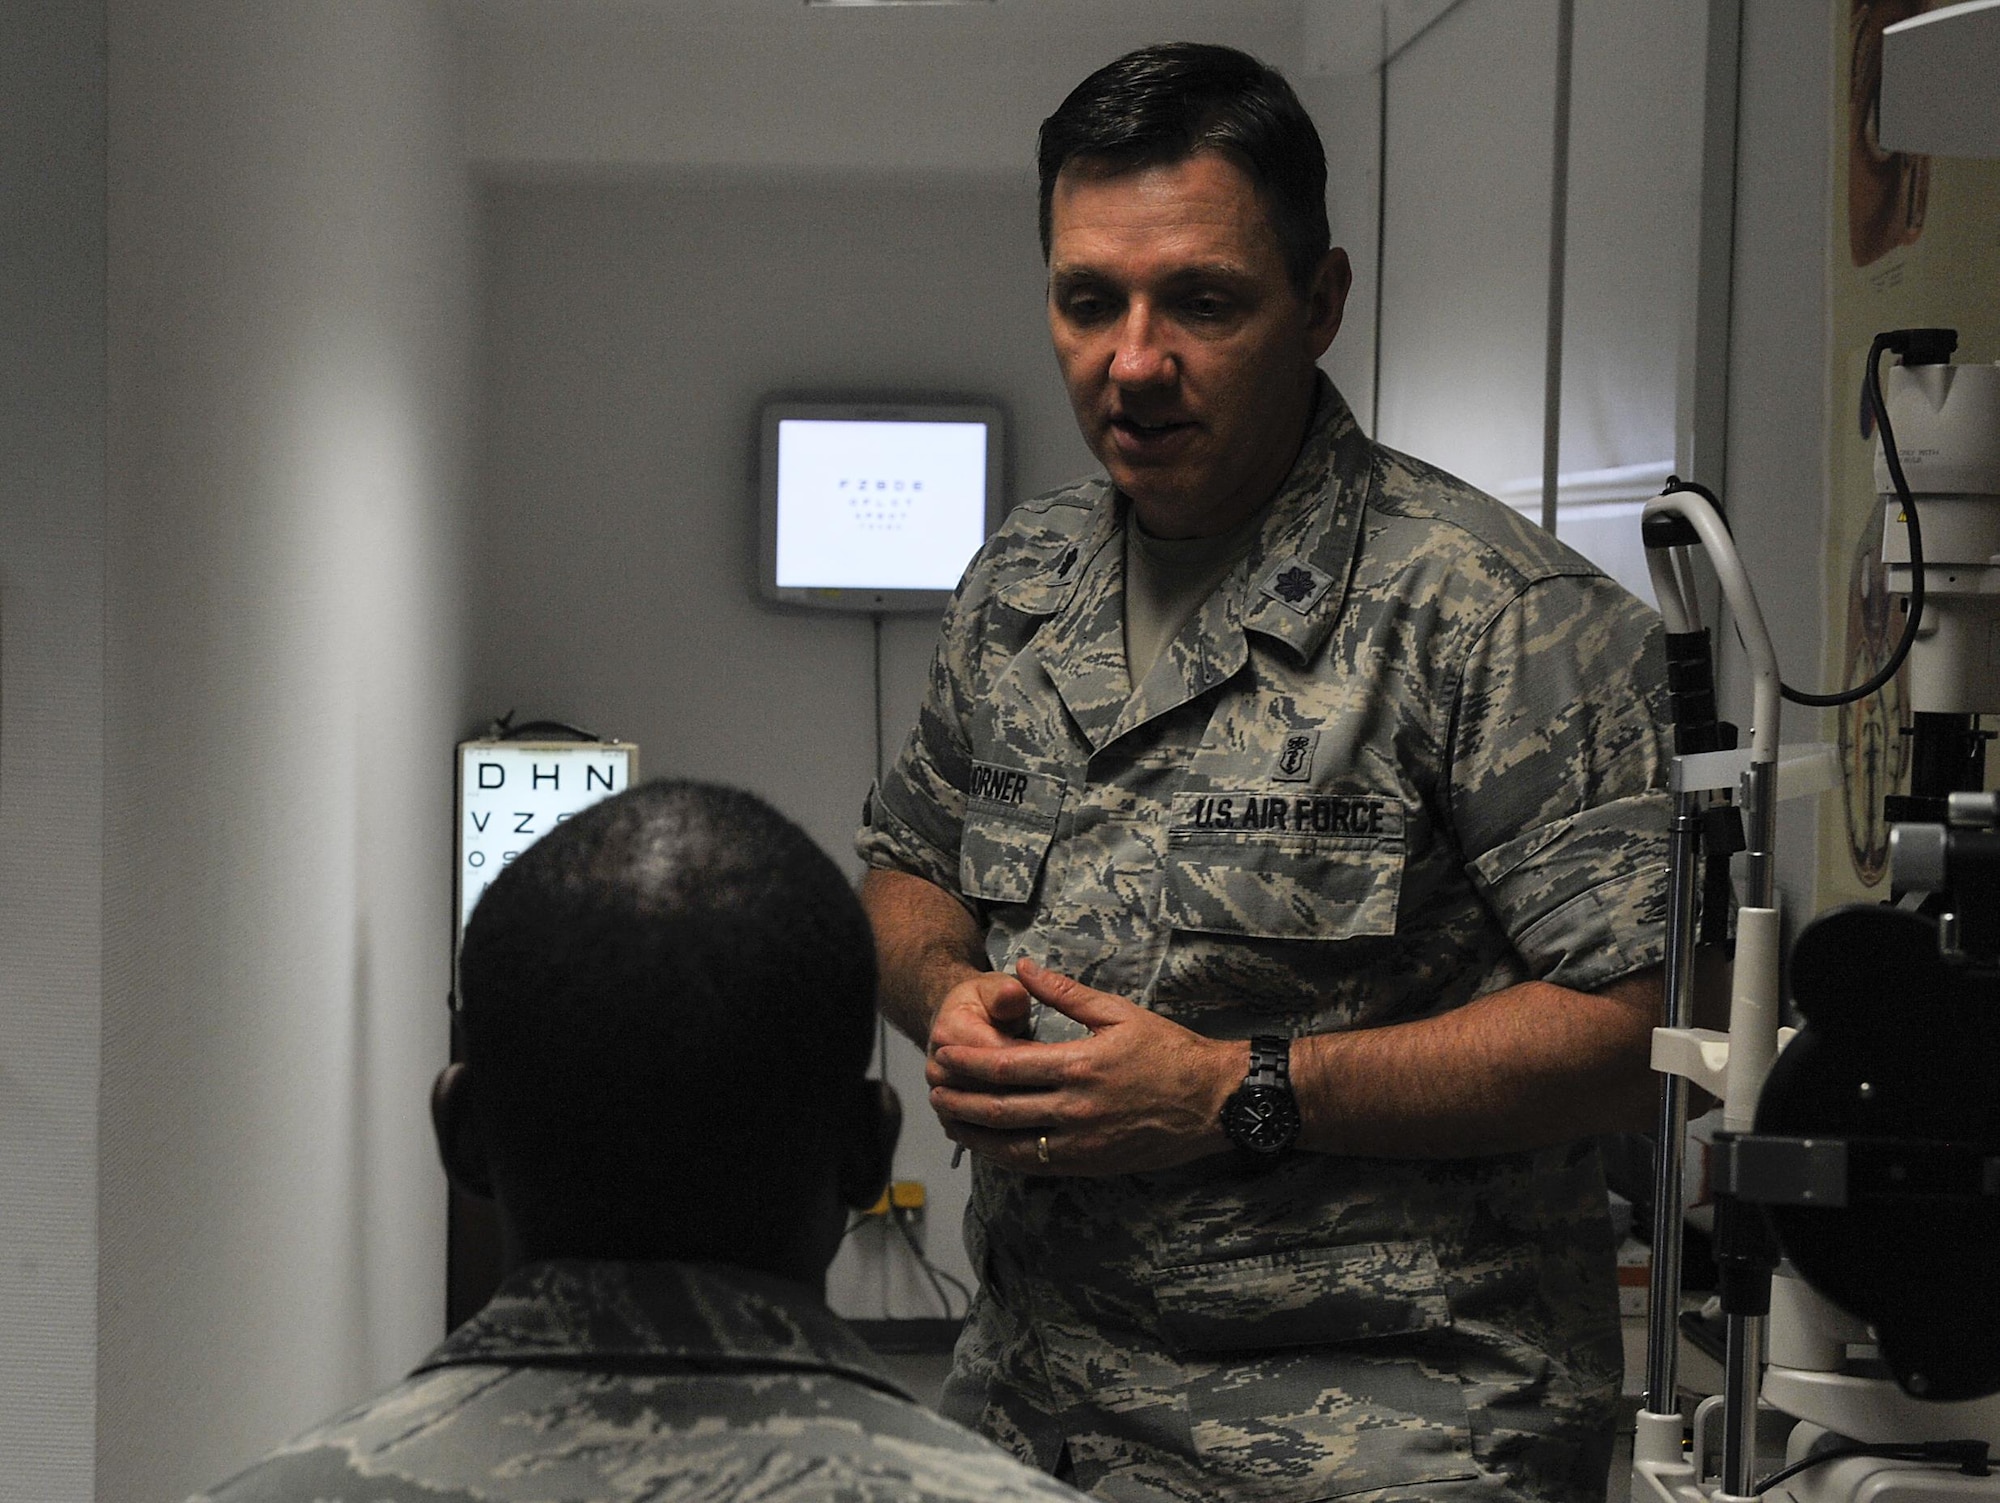 Lt. Col. Neil Horner, 86th Aerospace Medicine Squadron optometry flight commander (right), speaks to Senior Airman Jonathan Robins, 1st Combat Communications Squadron maintenance operations center technician, about his eye health June 23, 2016, at Ramstein Air Base, Germany. The clinic is the largest in U.S. Air Forces in Europe, offering assistance and care to more than 54,000 Americans. (U.S. Air Force photo/Senior Airman Larissa Greatwood)